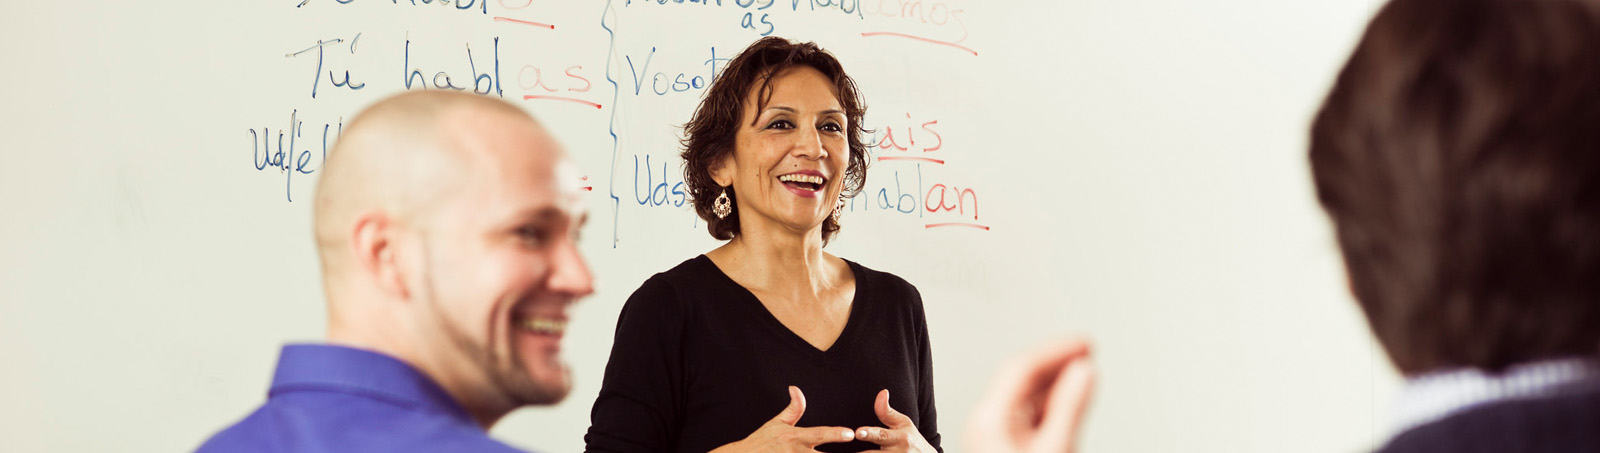 Faculty teaching in classroom